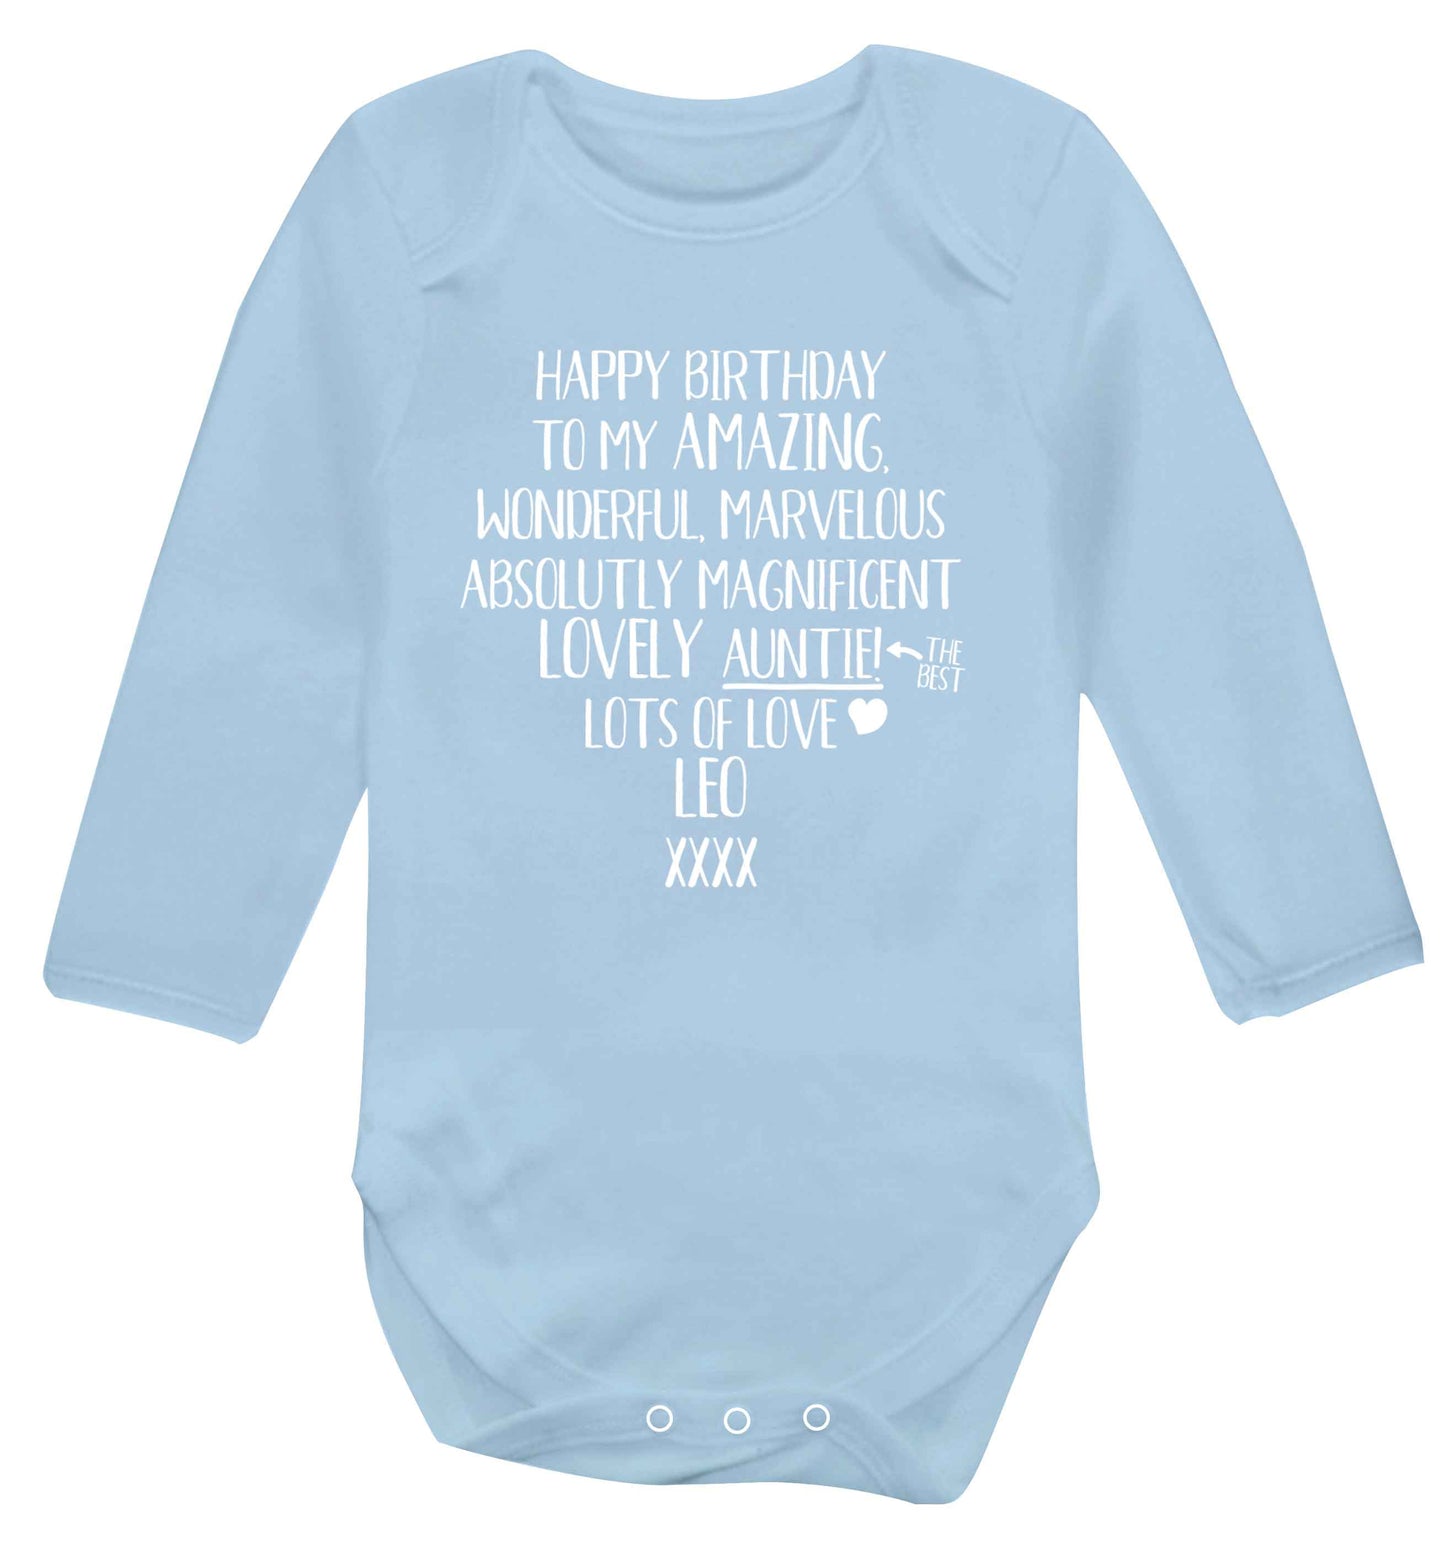 Personalised happy birthday to my amazing, wonderful, lovely auntie Baby Vest long sleeved pale blue 6-12 months